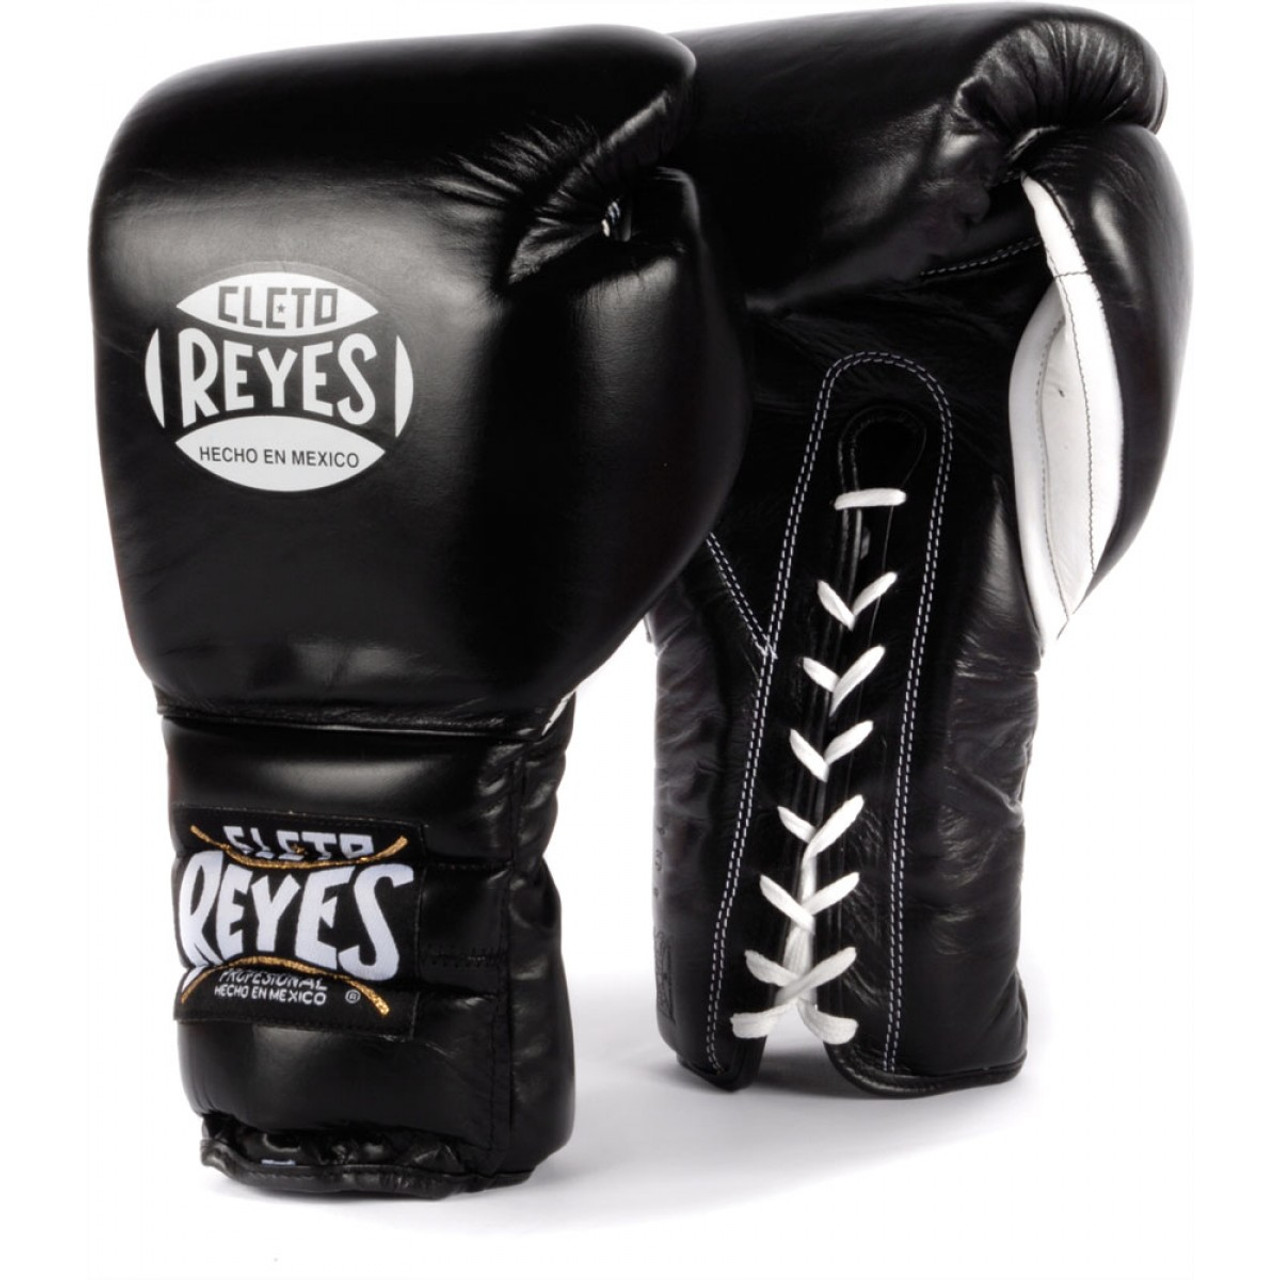 Corchete anillo Posible Cleto Reyes Lace Up Training Gloves Black | FIGHT SHOP